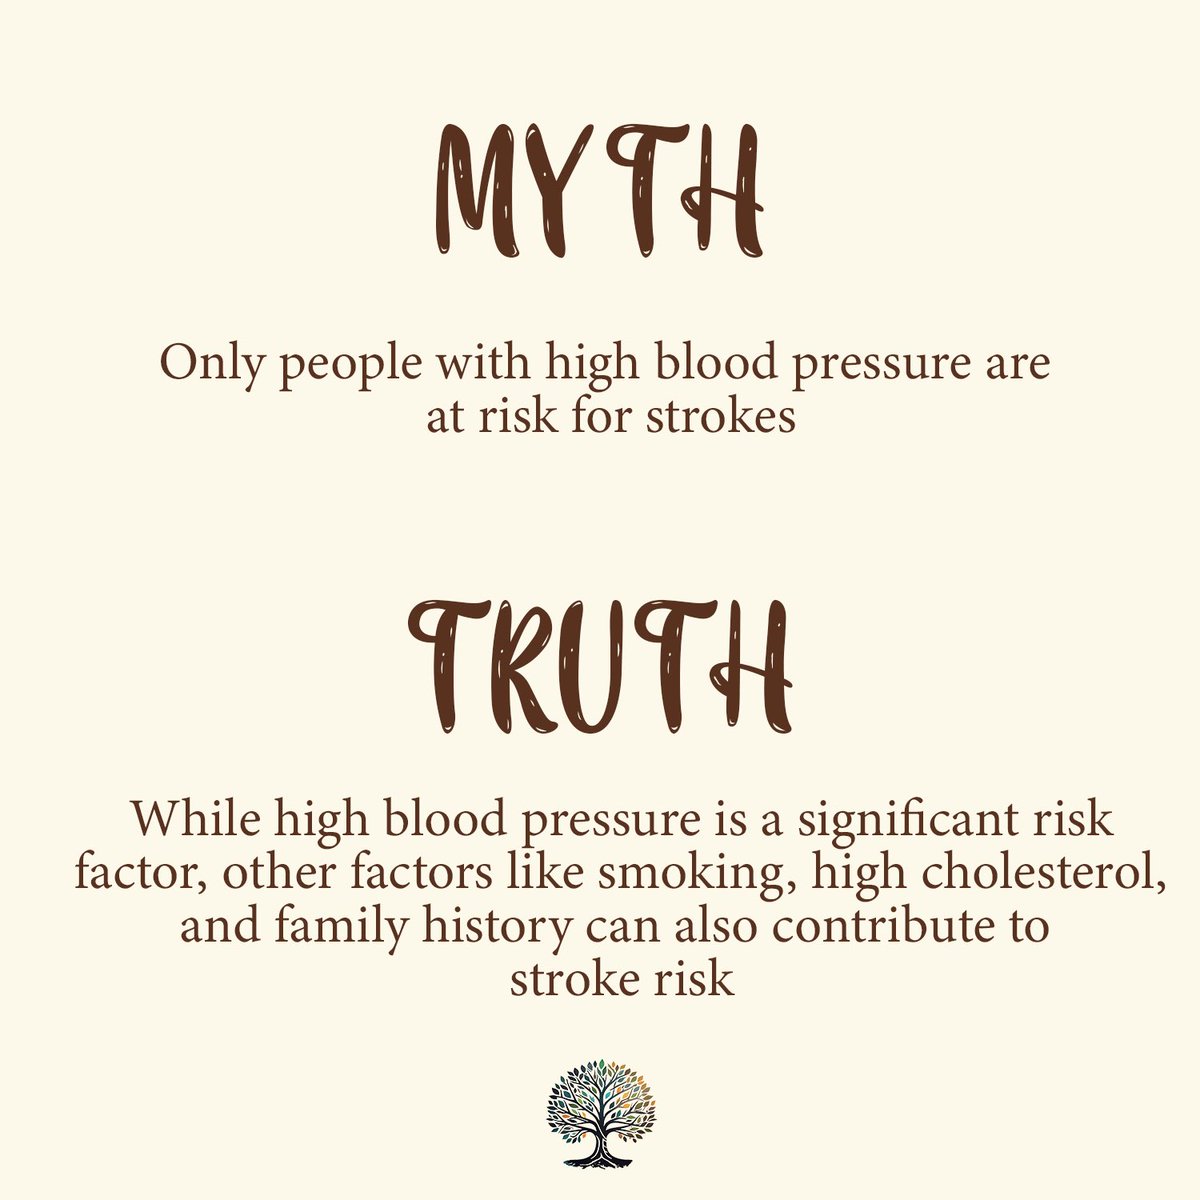 Join us every #MythMonday as we shed light on life-threatening diseases, sharing both myths and facts to empower and inform. Together, let's combat misinformation and promote health awareness! 💙🩺 #HealthFacts #FightMisinformation #StrokeAwareness #HealthRights